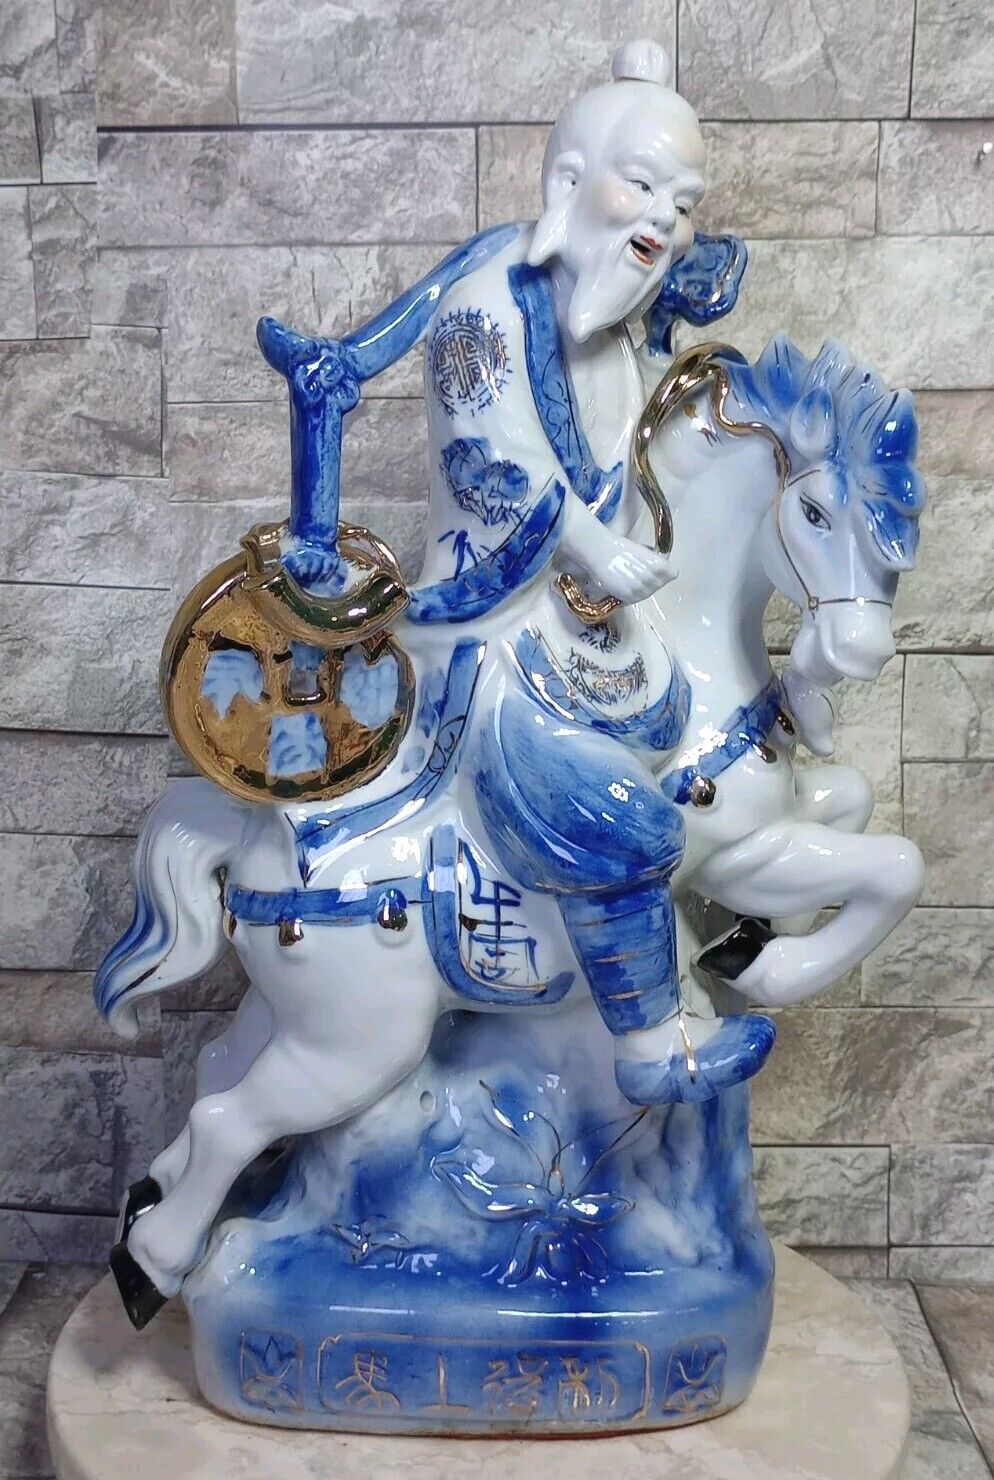 CHINESE STATUE OF MAN W/ FISH RIDING HORSE ~ LARGE & HEAVY ~ 17.5